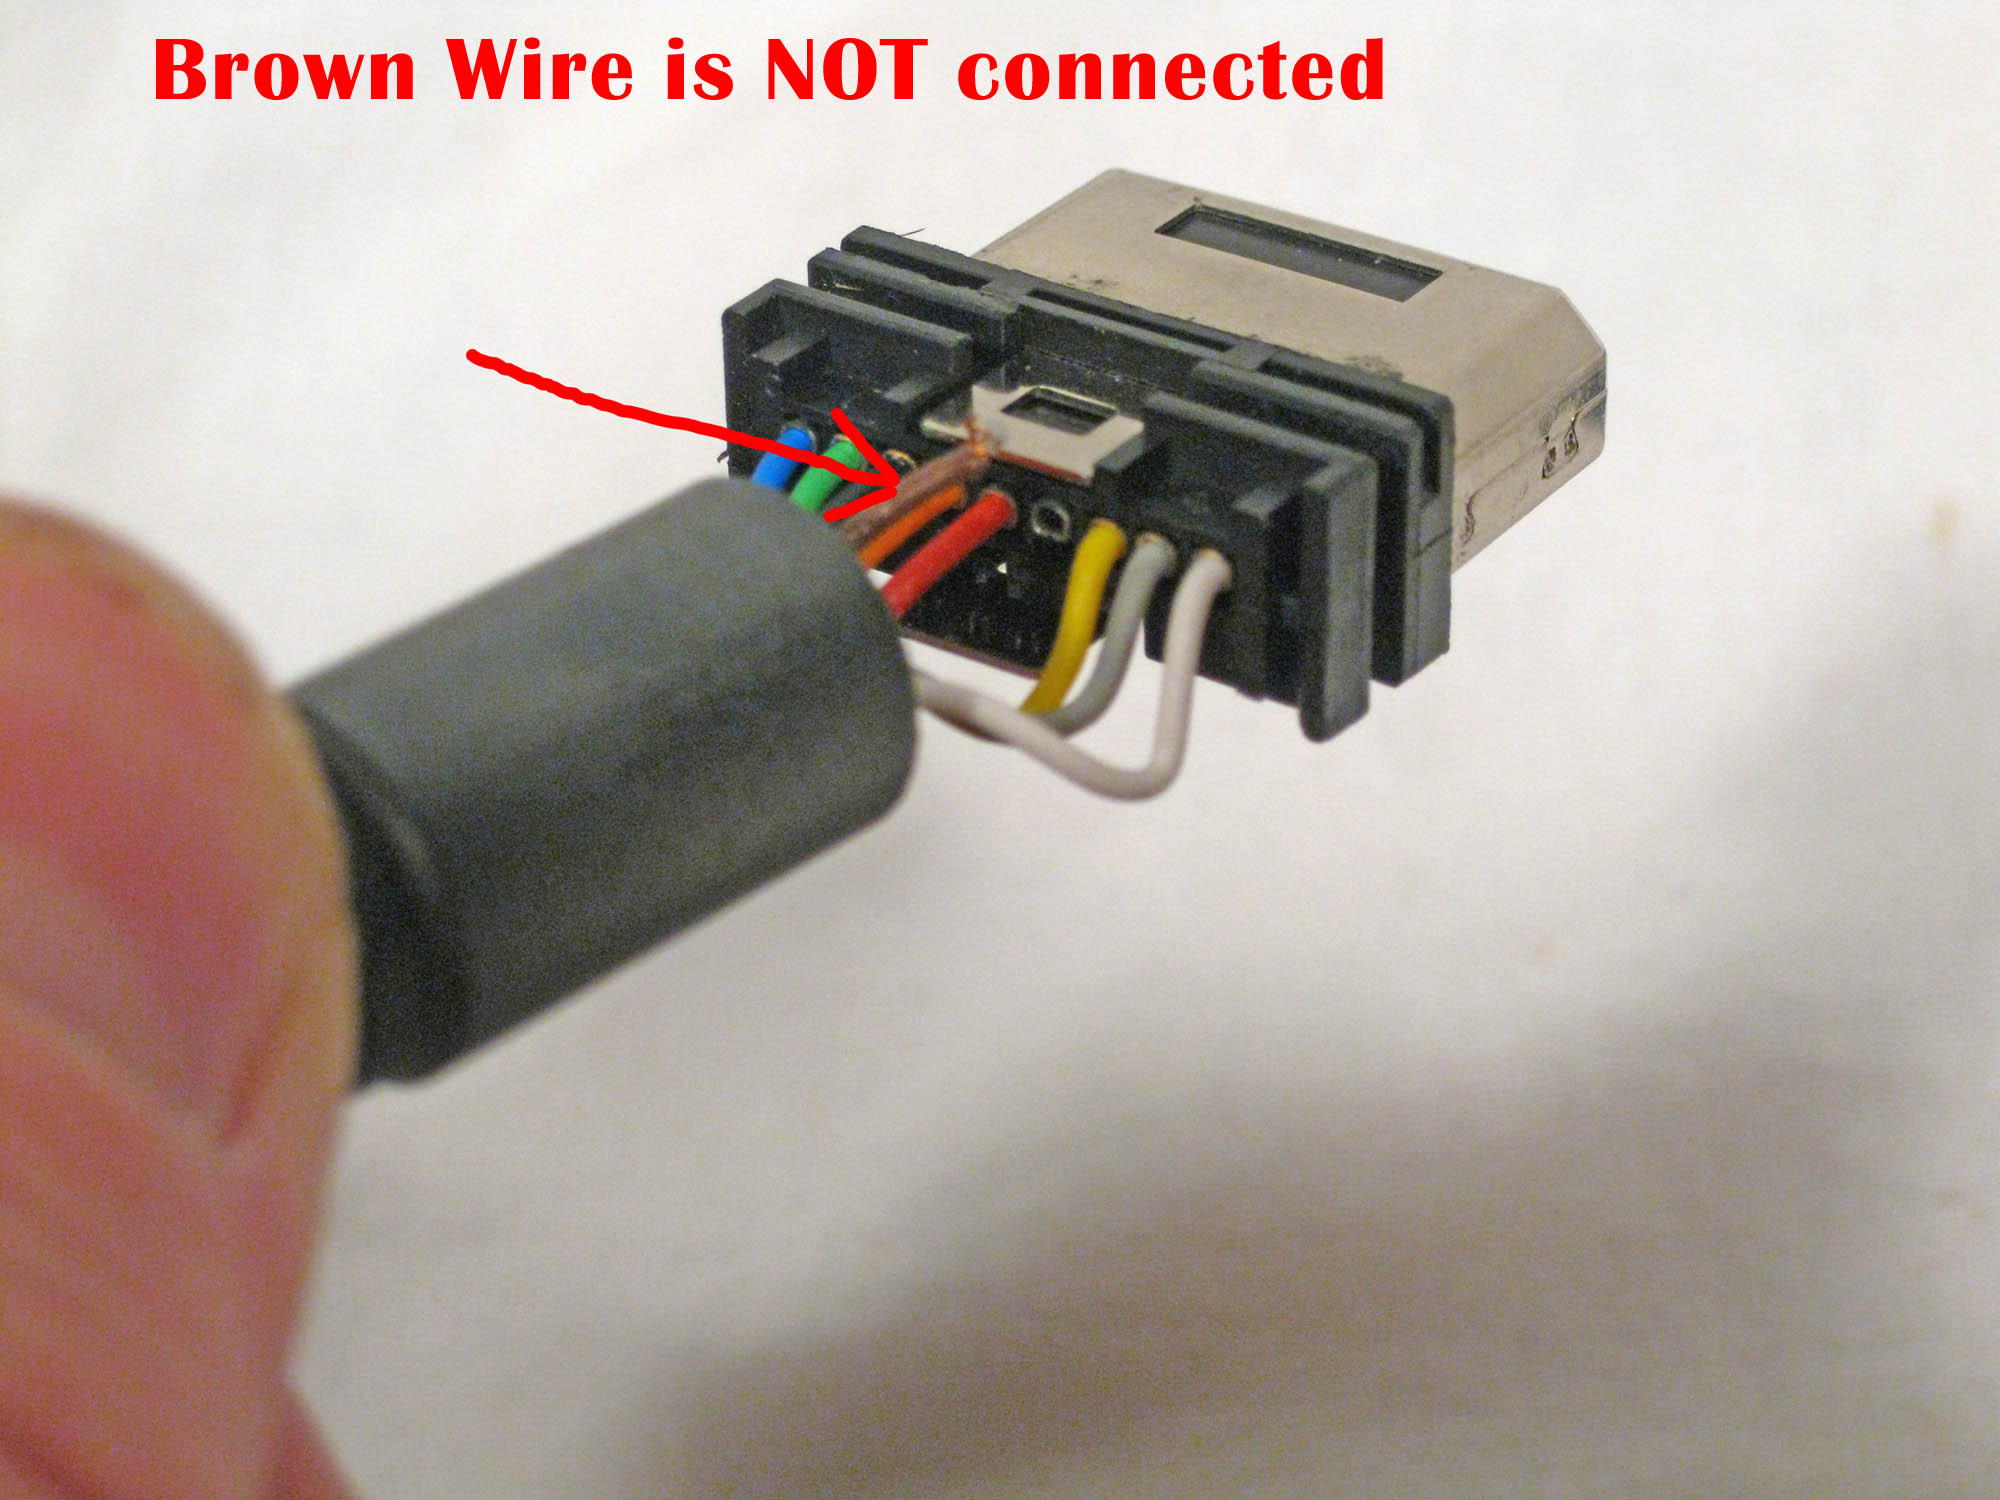 Picture of my Brown Wire not connected on the connector port that attaches to the Sega Saturn